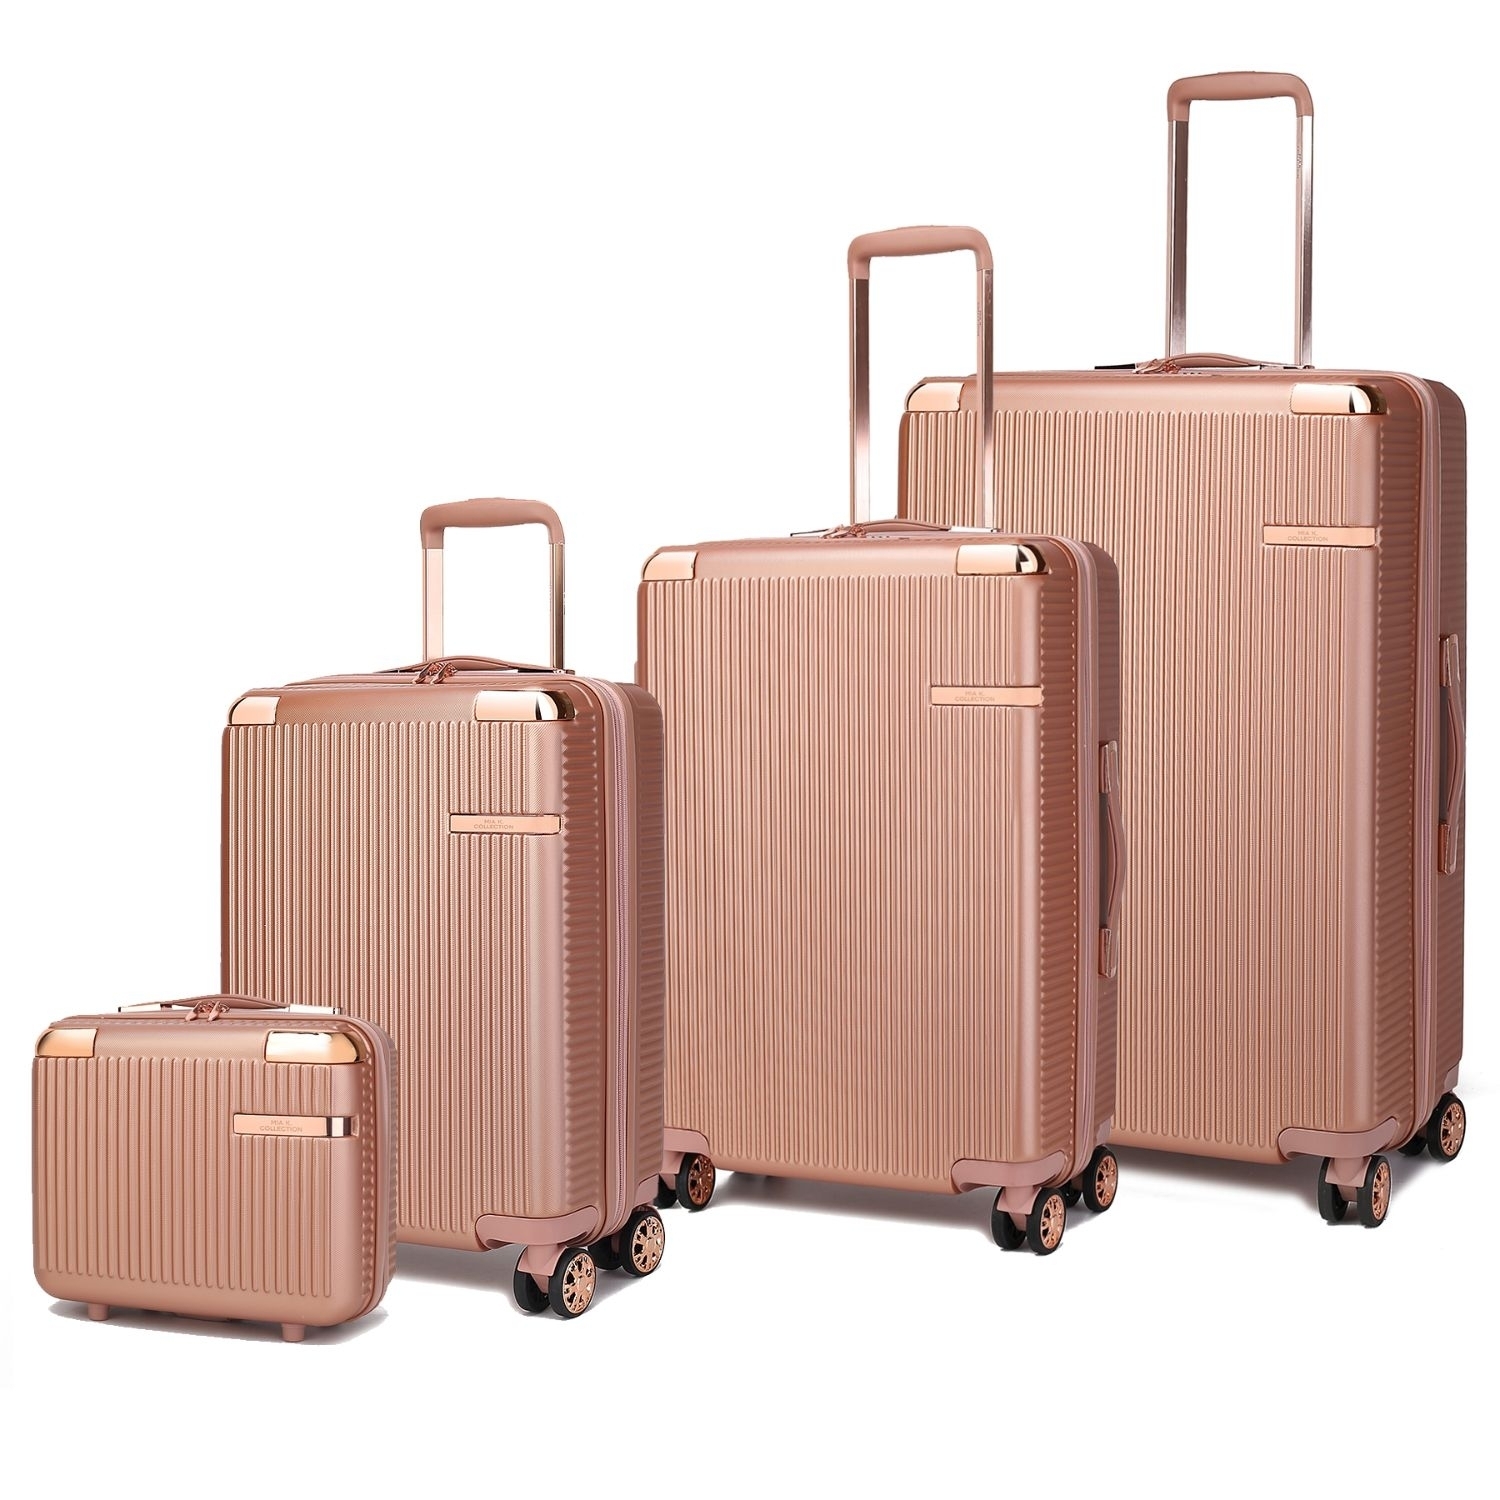 MKF Collection Tulum 4-piece Luggage Set By Mia K. - Rose Gold